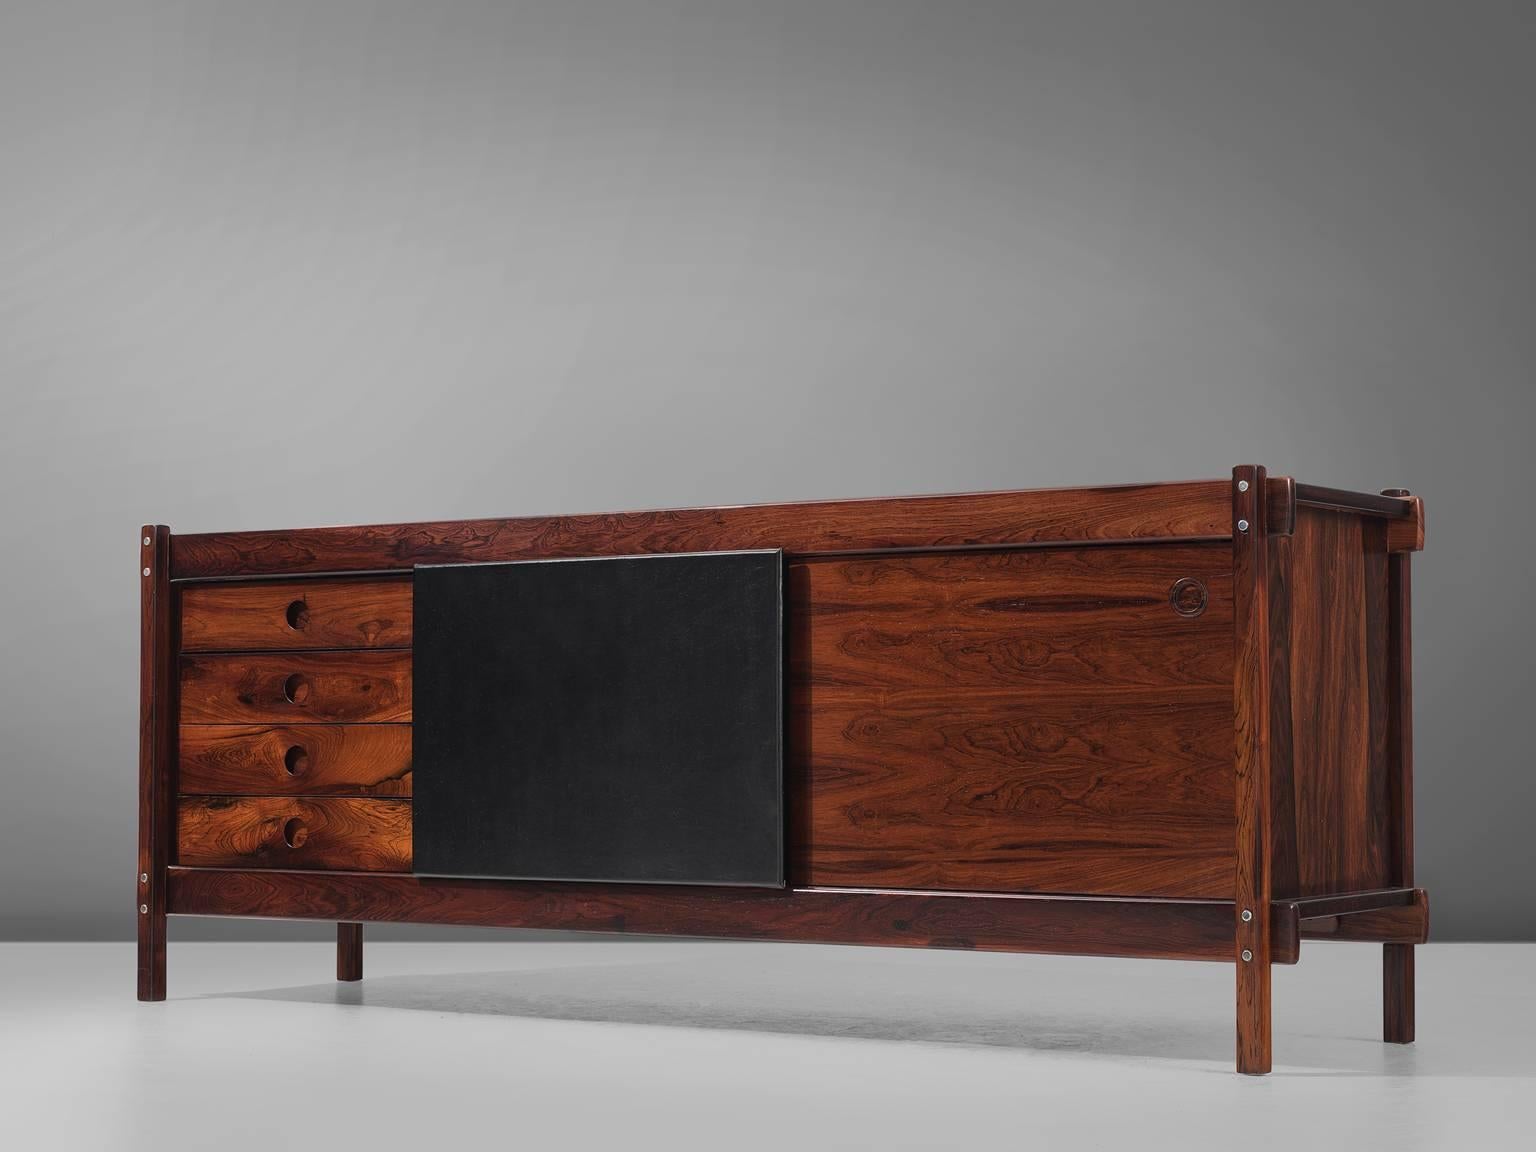 Sergio Rodrigues, buffet, rosewood and leather, Brazil, 1965.

This is a wonderful example of Brazilian modern furniture. Sturdy, warm and of supreme qualities in both material and craftsmanship. This small credenza has four drawers and two